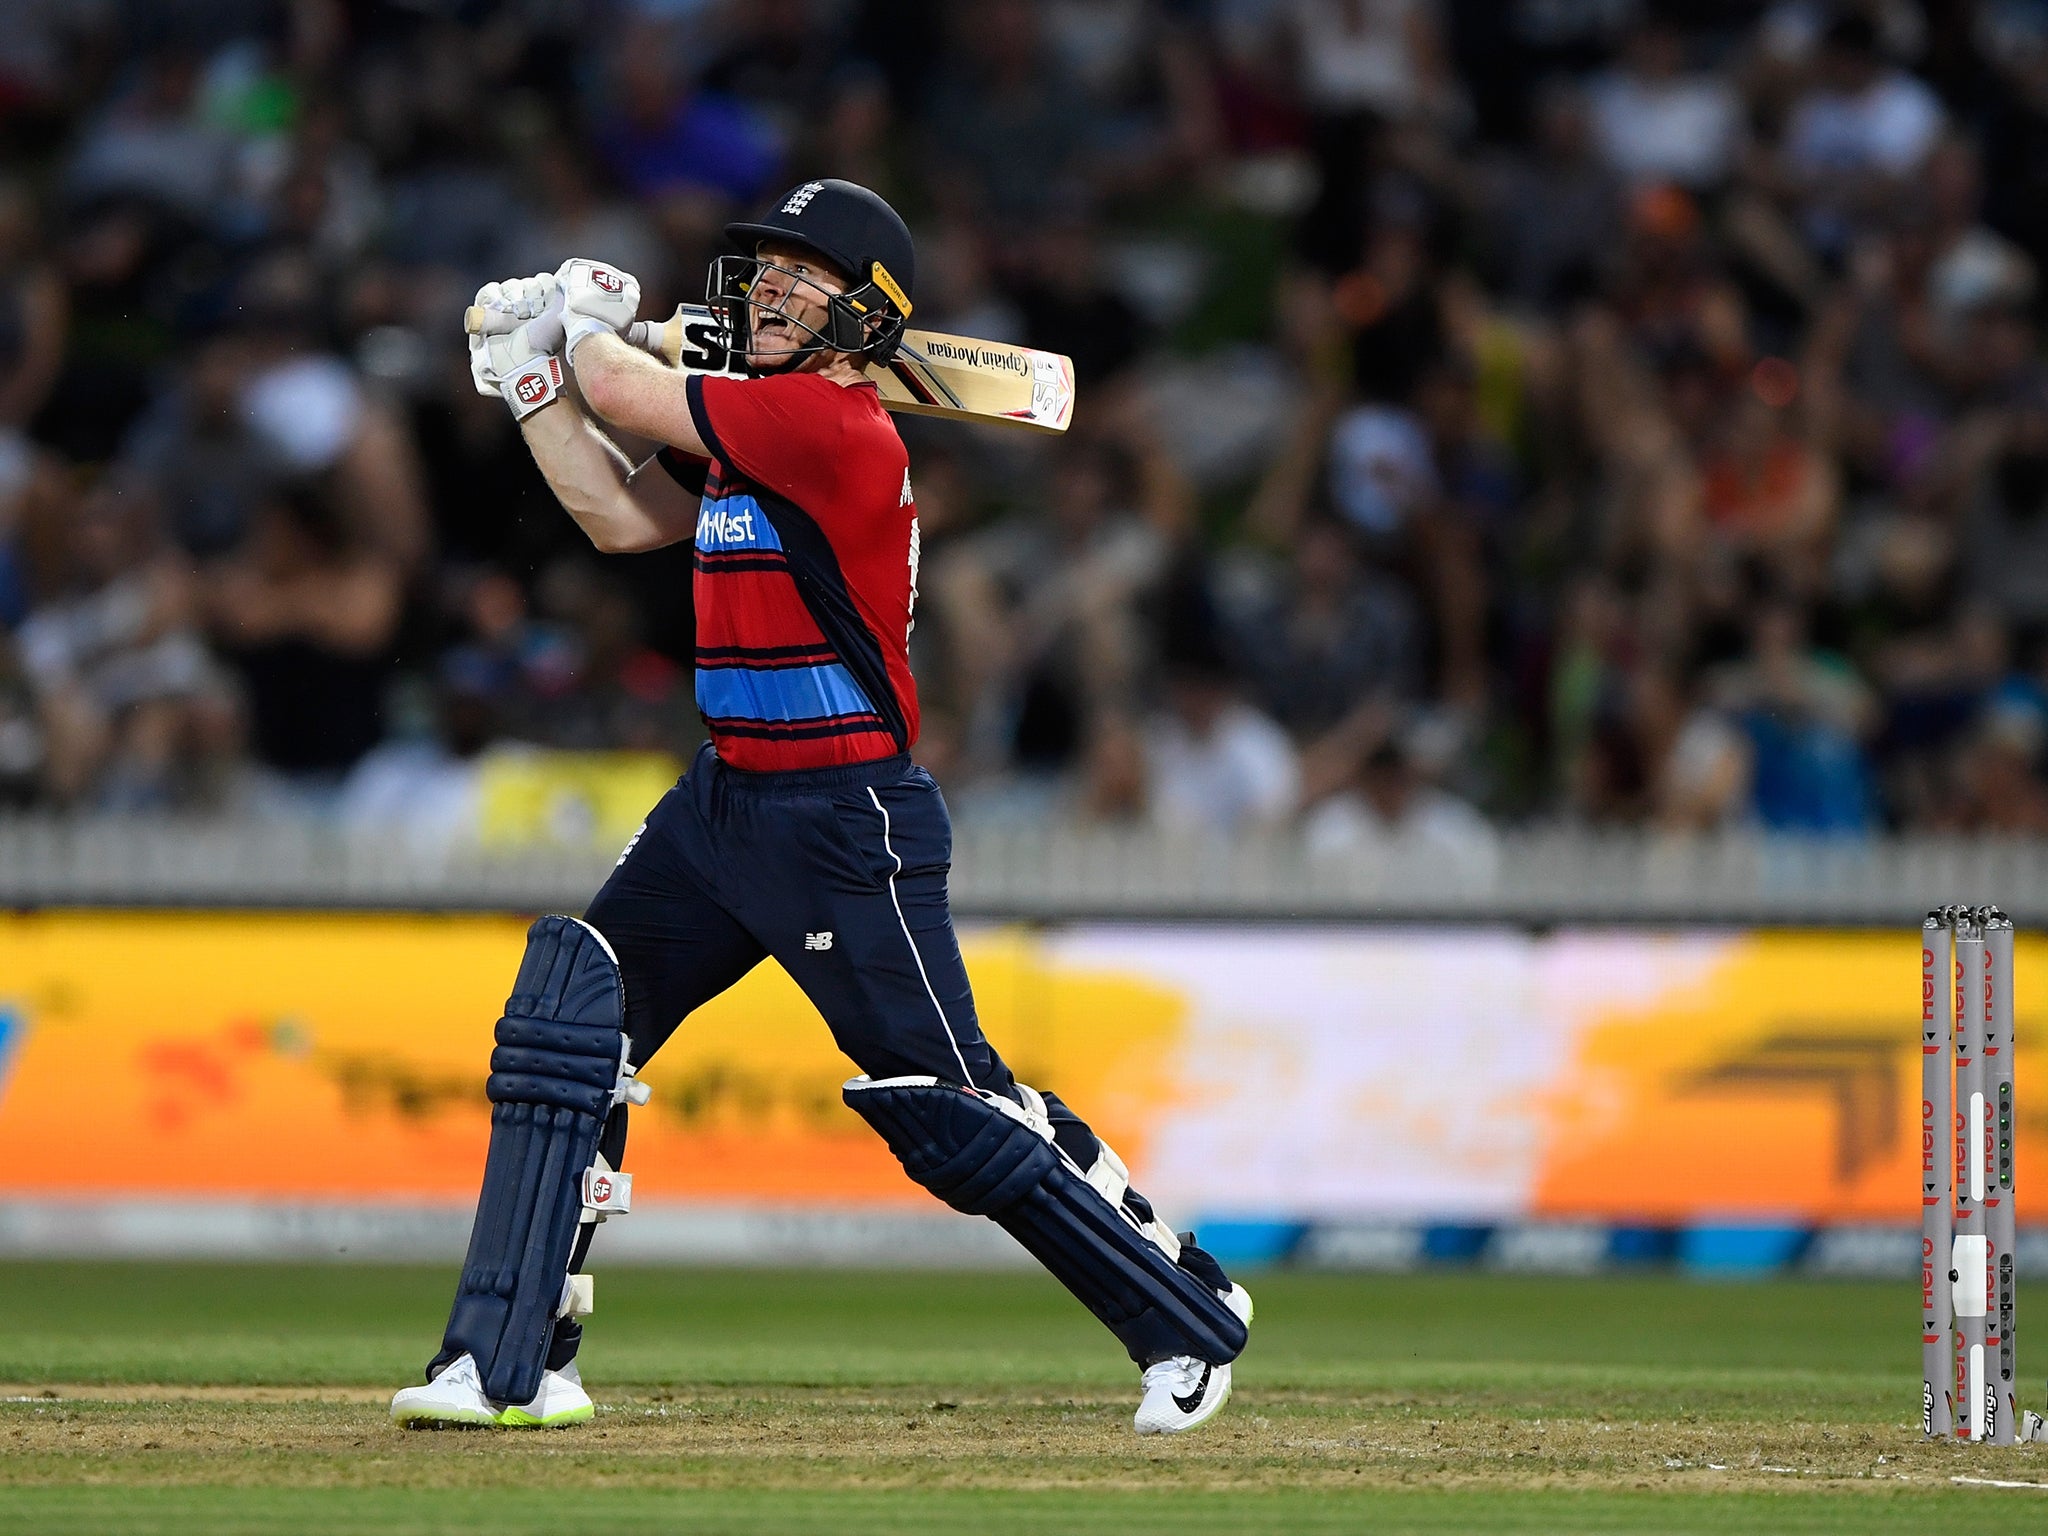 Eoin Morgan guided his England side to victory in their final T20 game against New Zealand